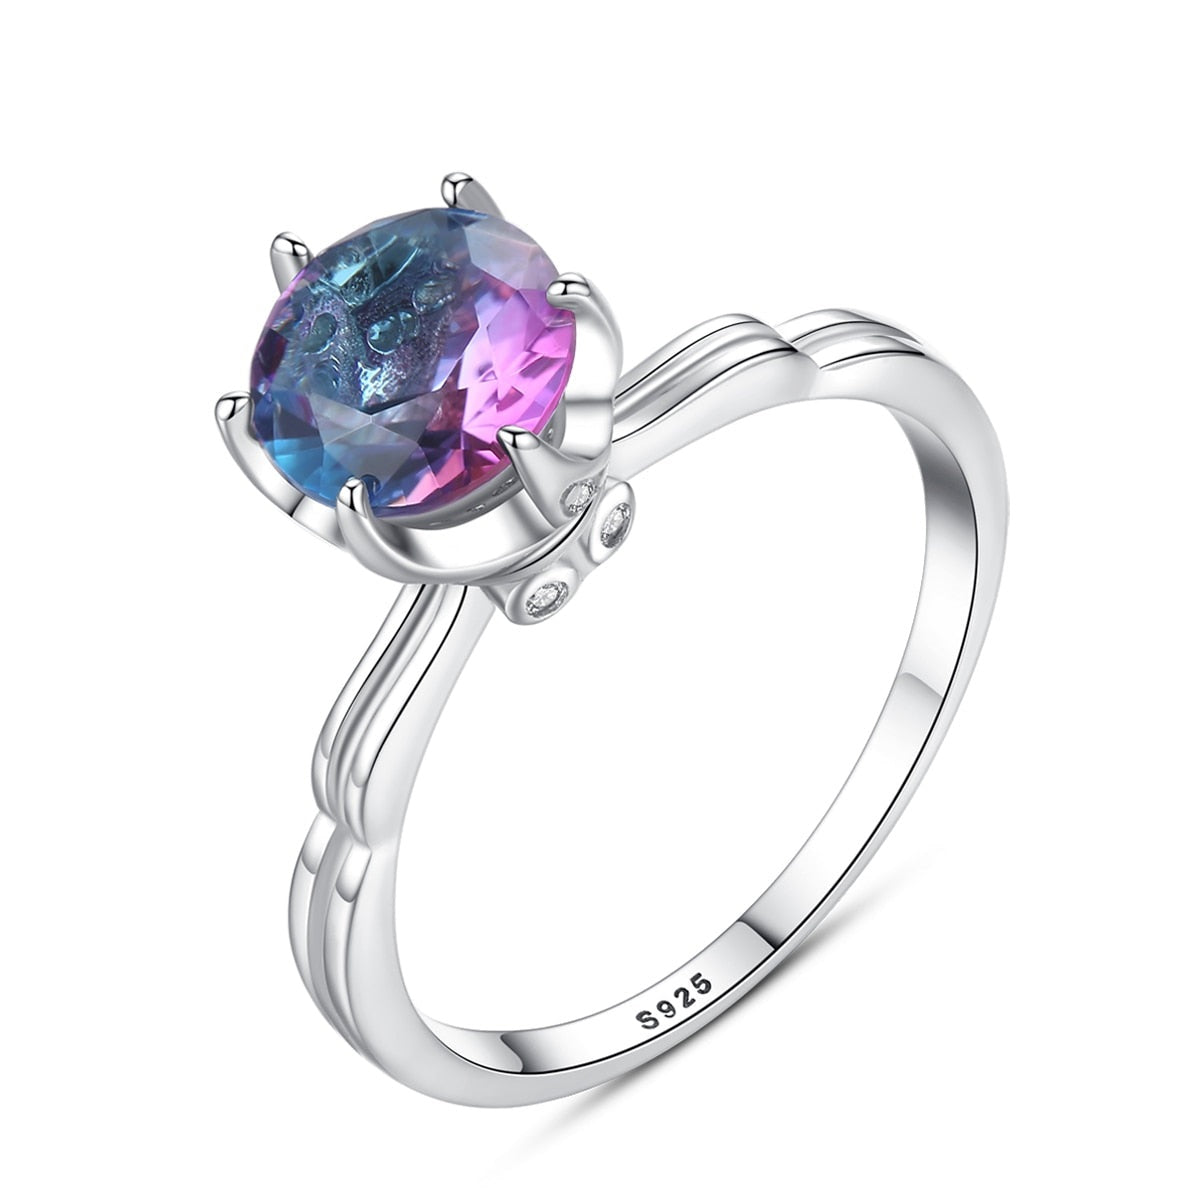 Genuine 925 Sterling Silver Rainbow Fire Mystic Topaz Solid Engagement Gemstone Ring